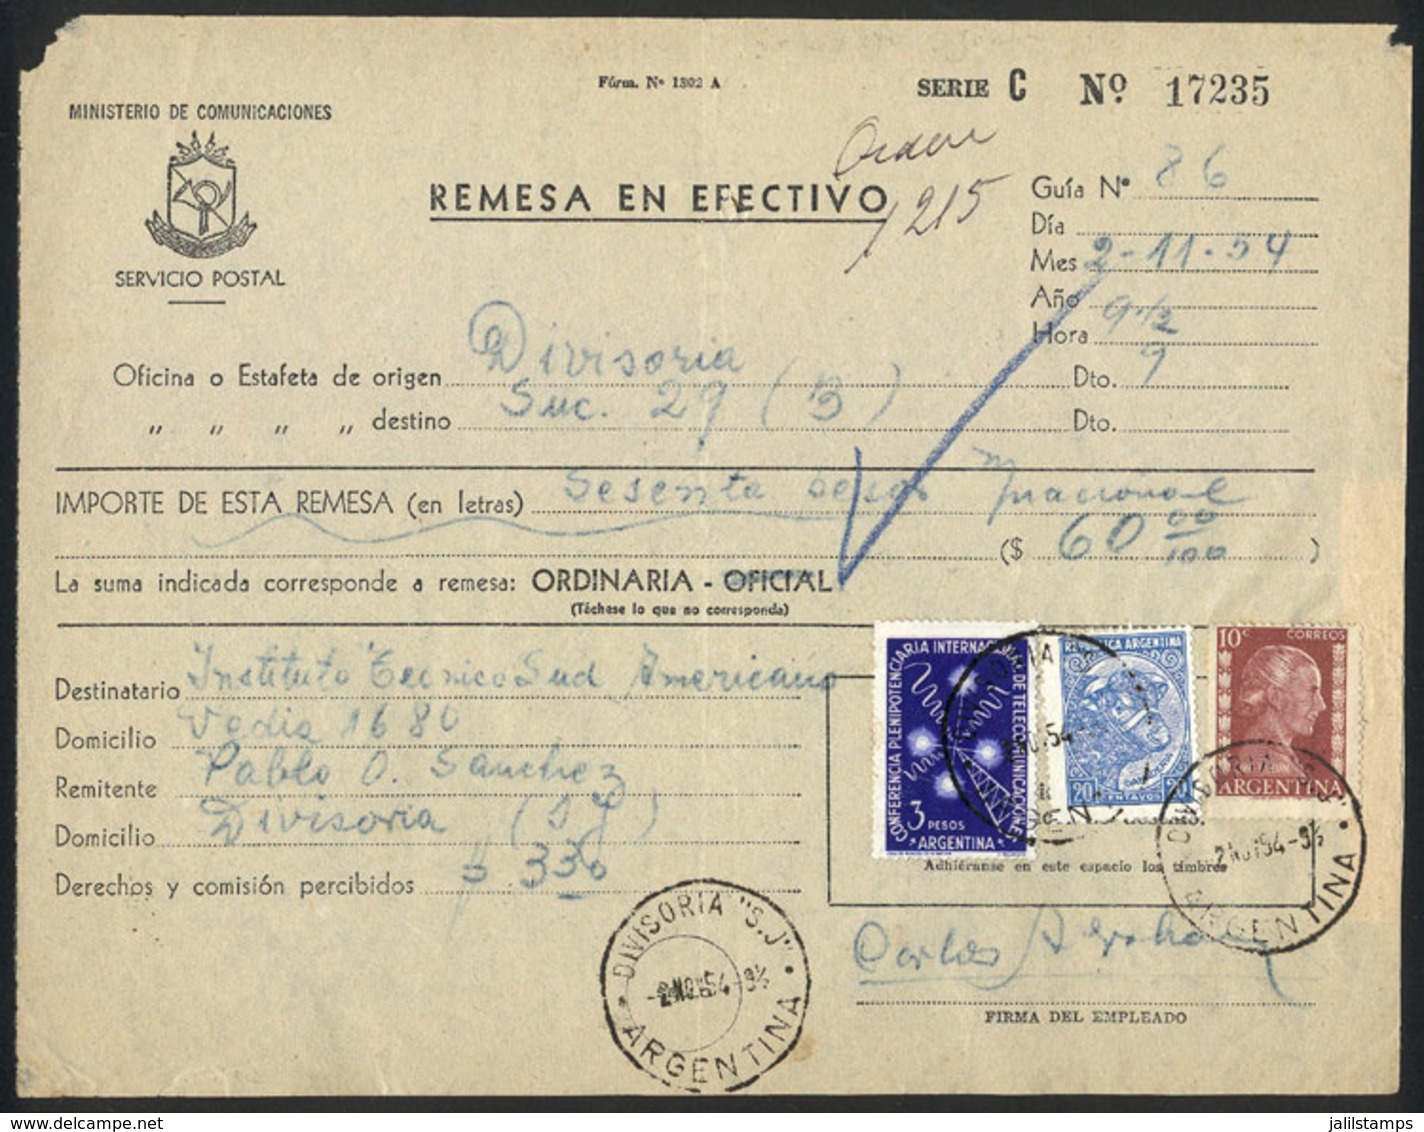 ARGENTINA: Postal Money Order Mailed On 2/NO/1954 With Postmark Of DIVISORIA (San Juan), Franked With 10c. Eva Perón + 2 - Covers & Documents